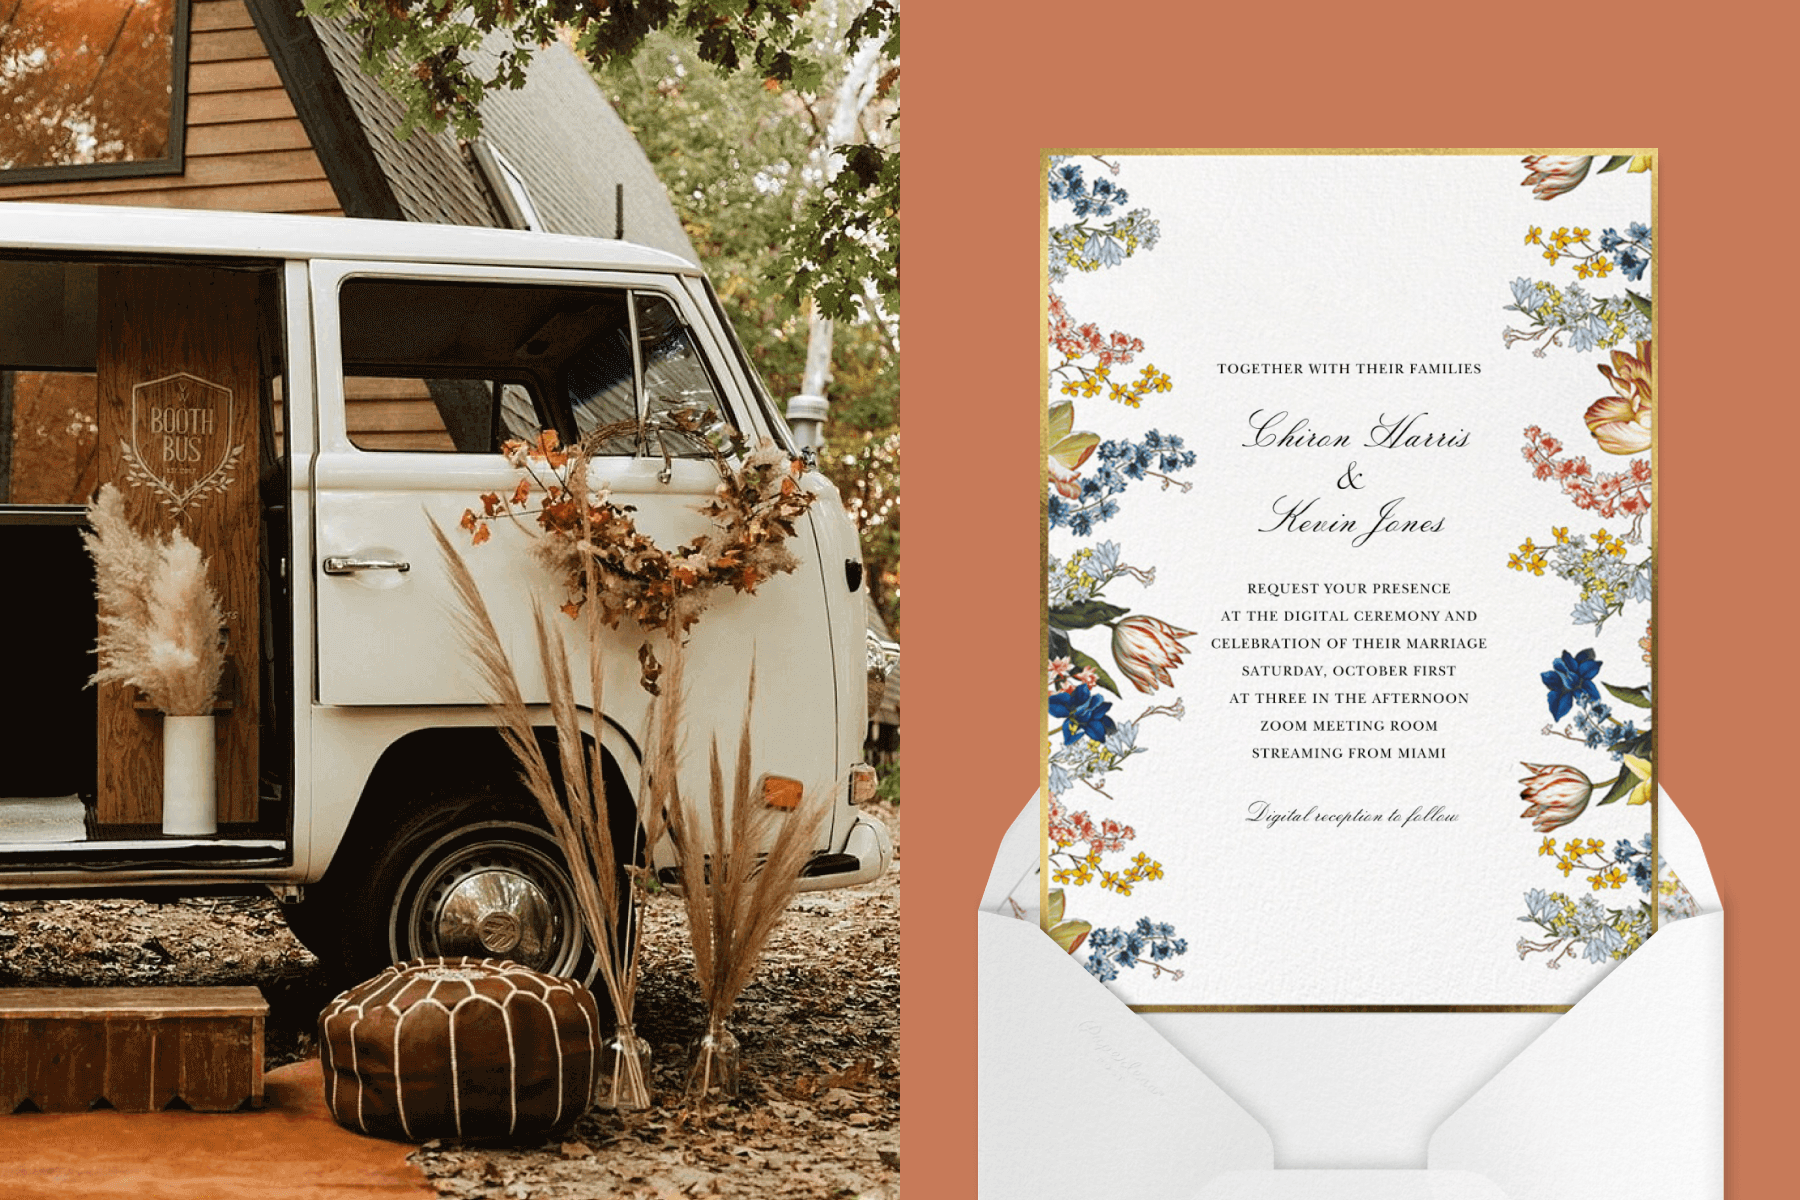 Left: A vintage bus-style van with autumn decor. Right: A wedding invitation with a delicate yet colorful floral border and gold foil.